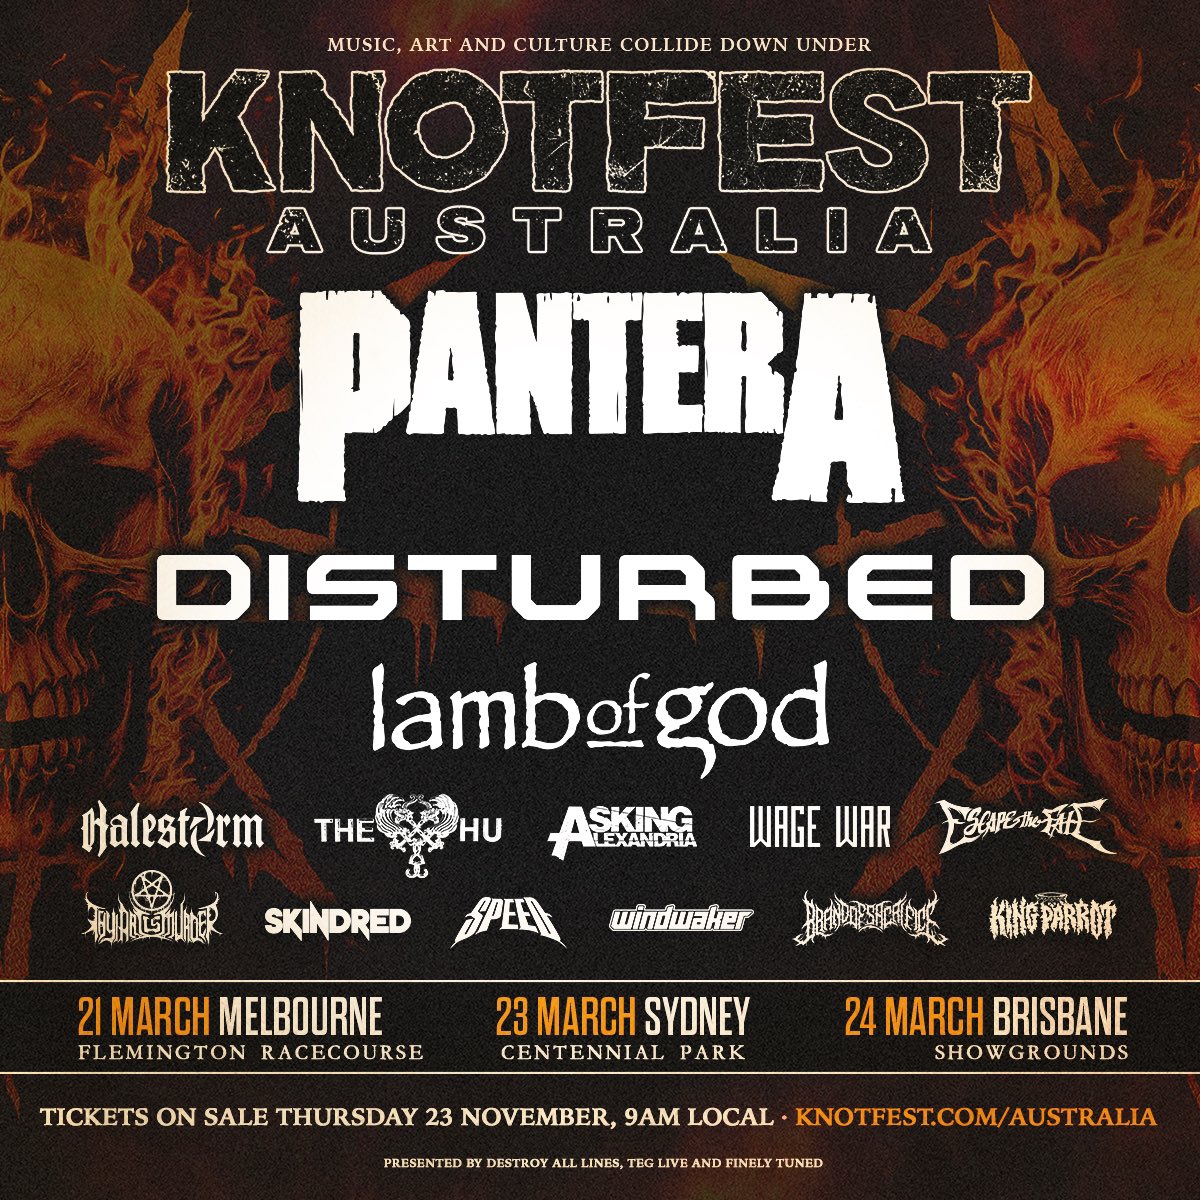 🇦🇺 KNOTFEST AUSTRALIA 🎪

Sign up to access the presale now at knotfestau.com/lambofgod 

Early Bird Presale tickets are available Tuesday 21st November - 10am Local Time

General Public Tickets on sale from Thursday 23rd November - 9am Local Time